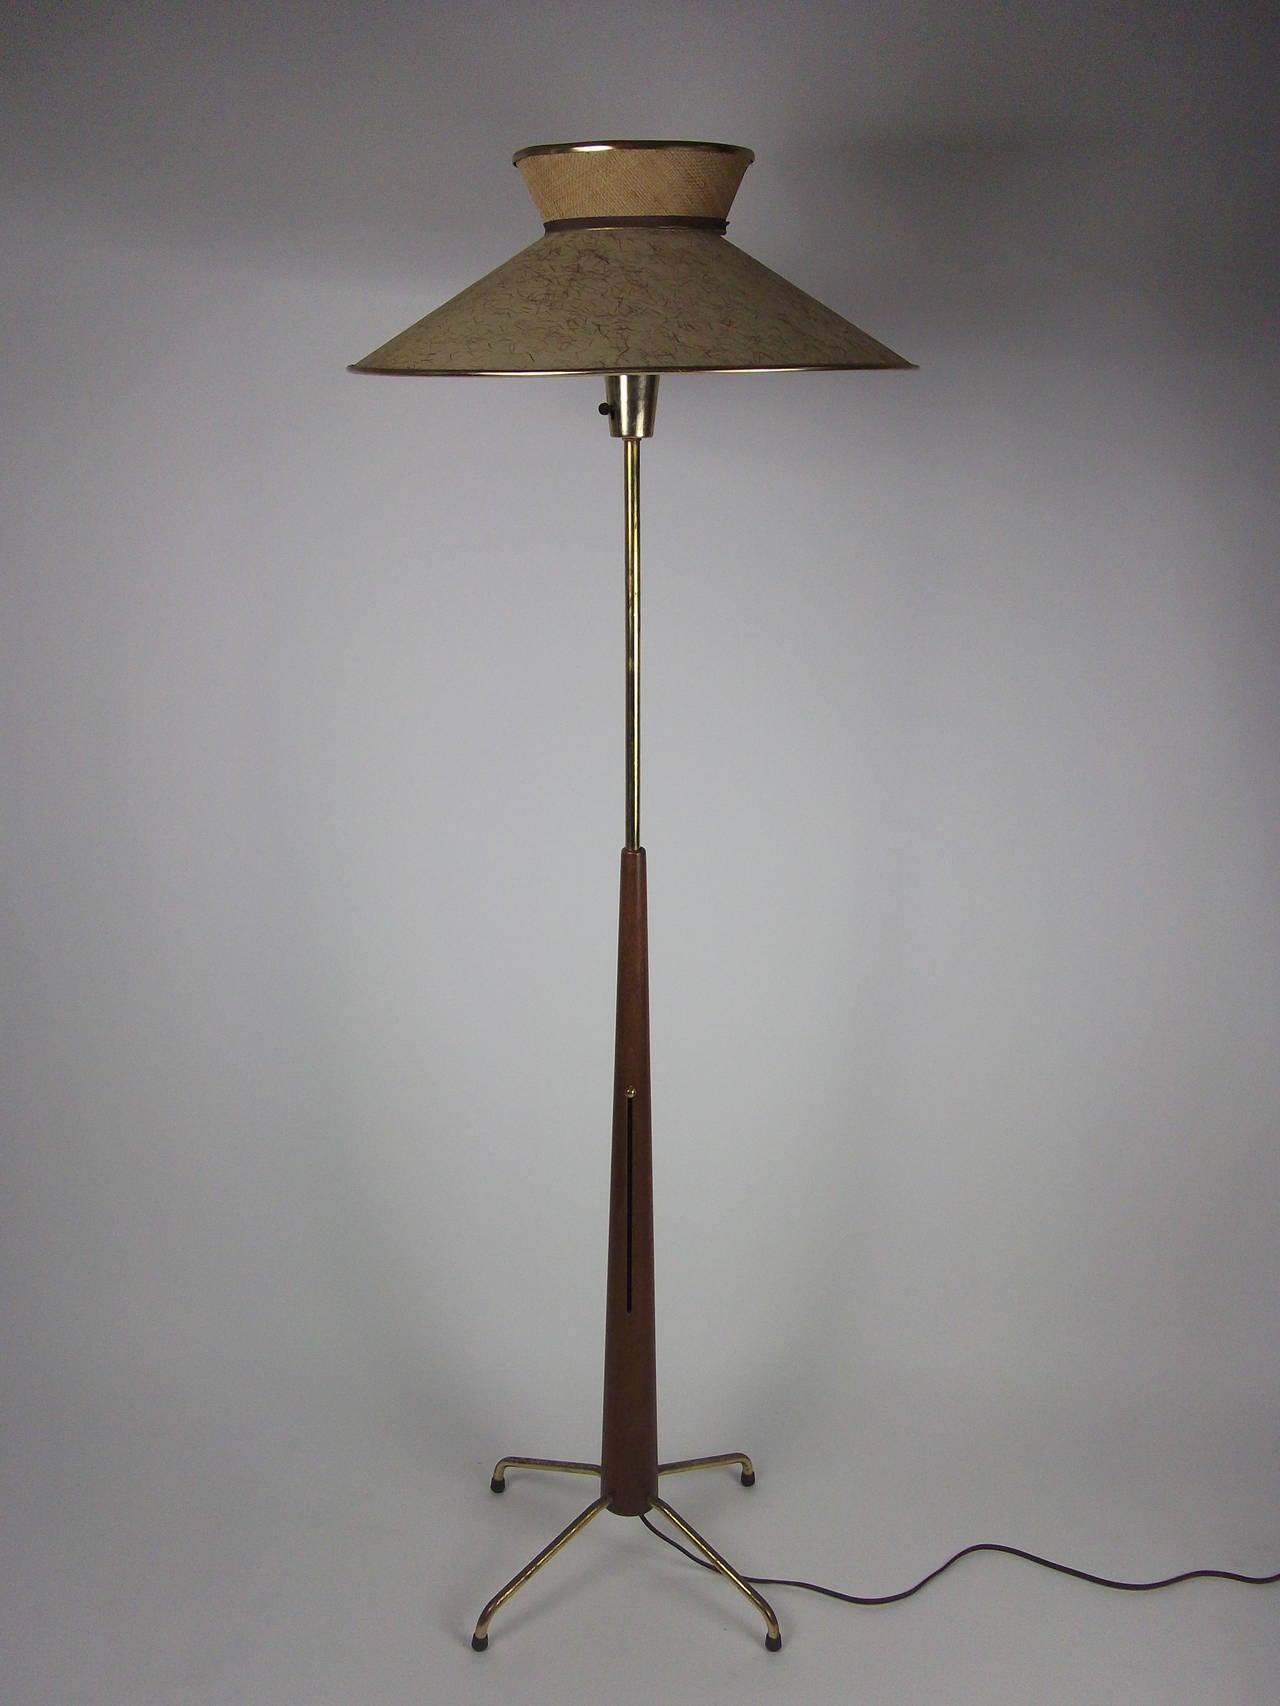 1950s Adjustable Floor Lamp Attributed to Gerald Thurston for Lightolier In Good Condition For Sale In Victoria, British Columbia